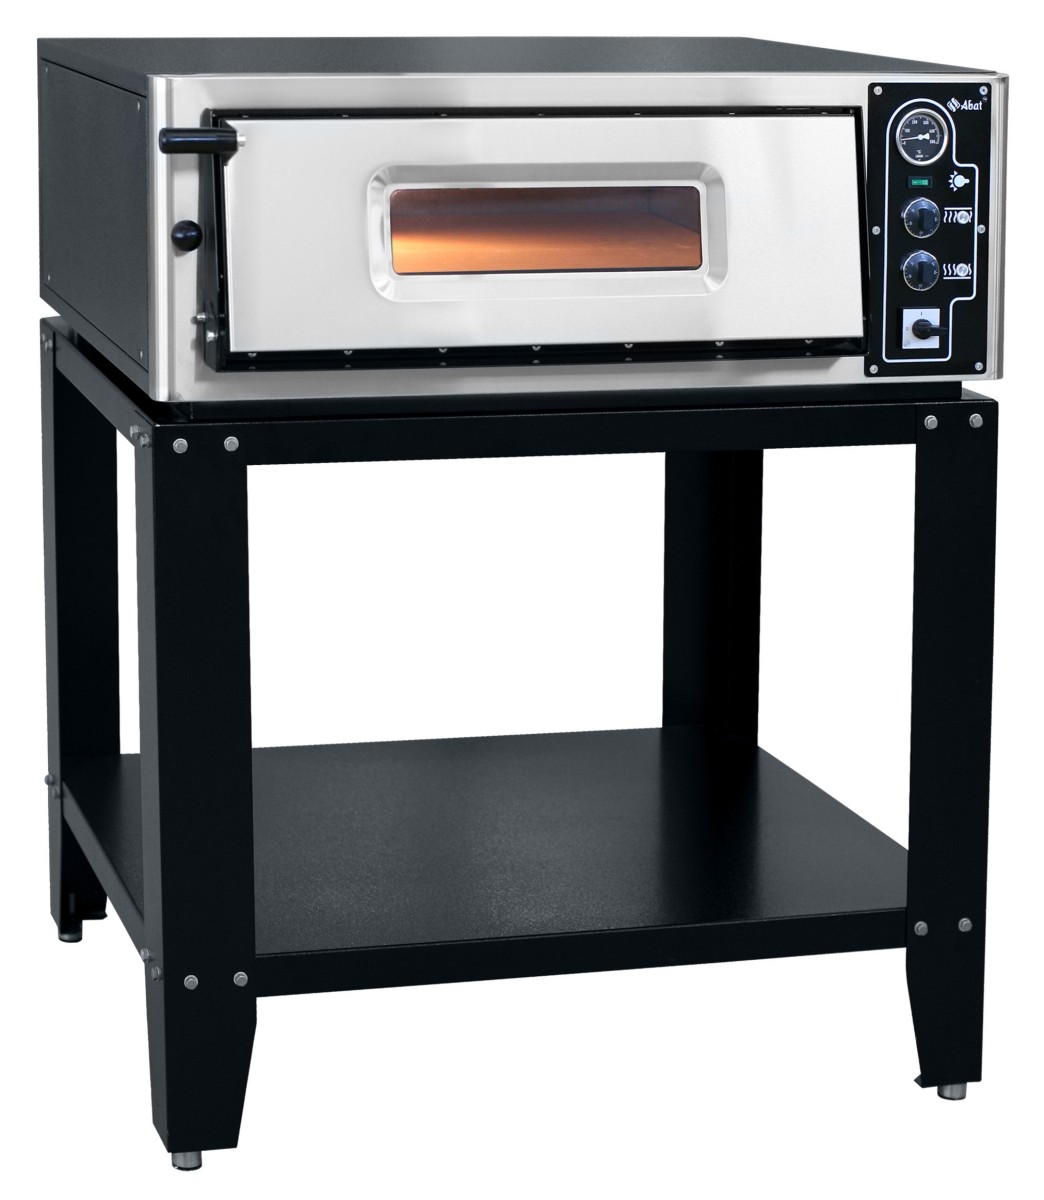 Support for the Abat PP-4 pizza oven